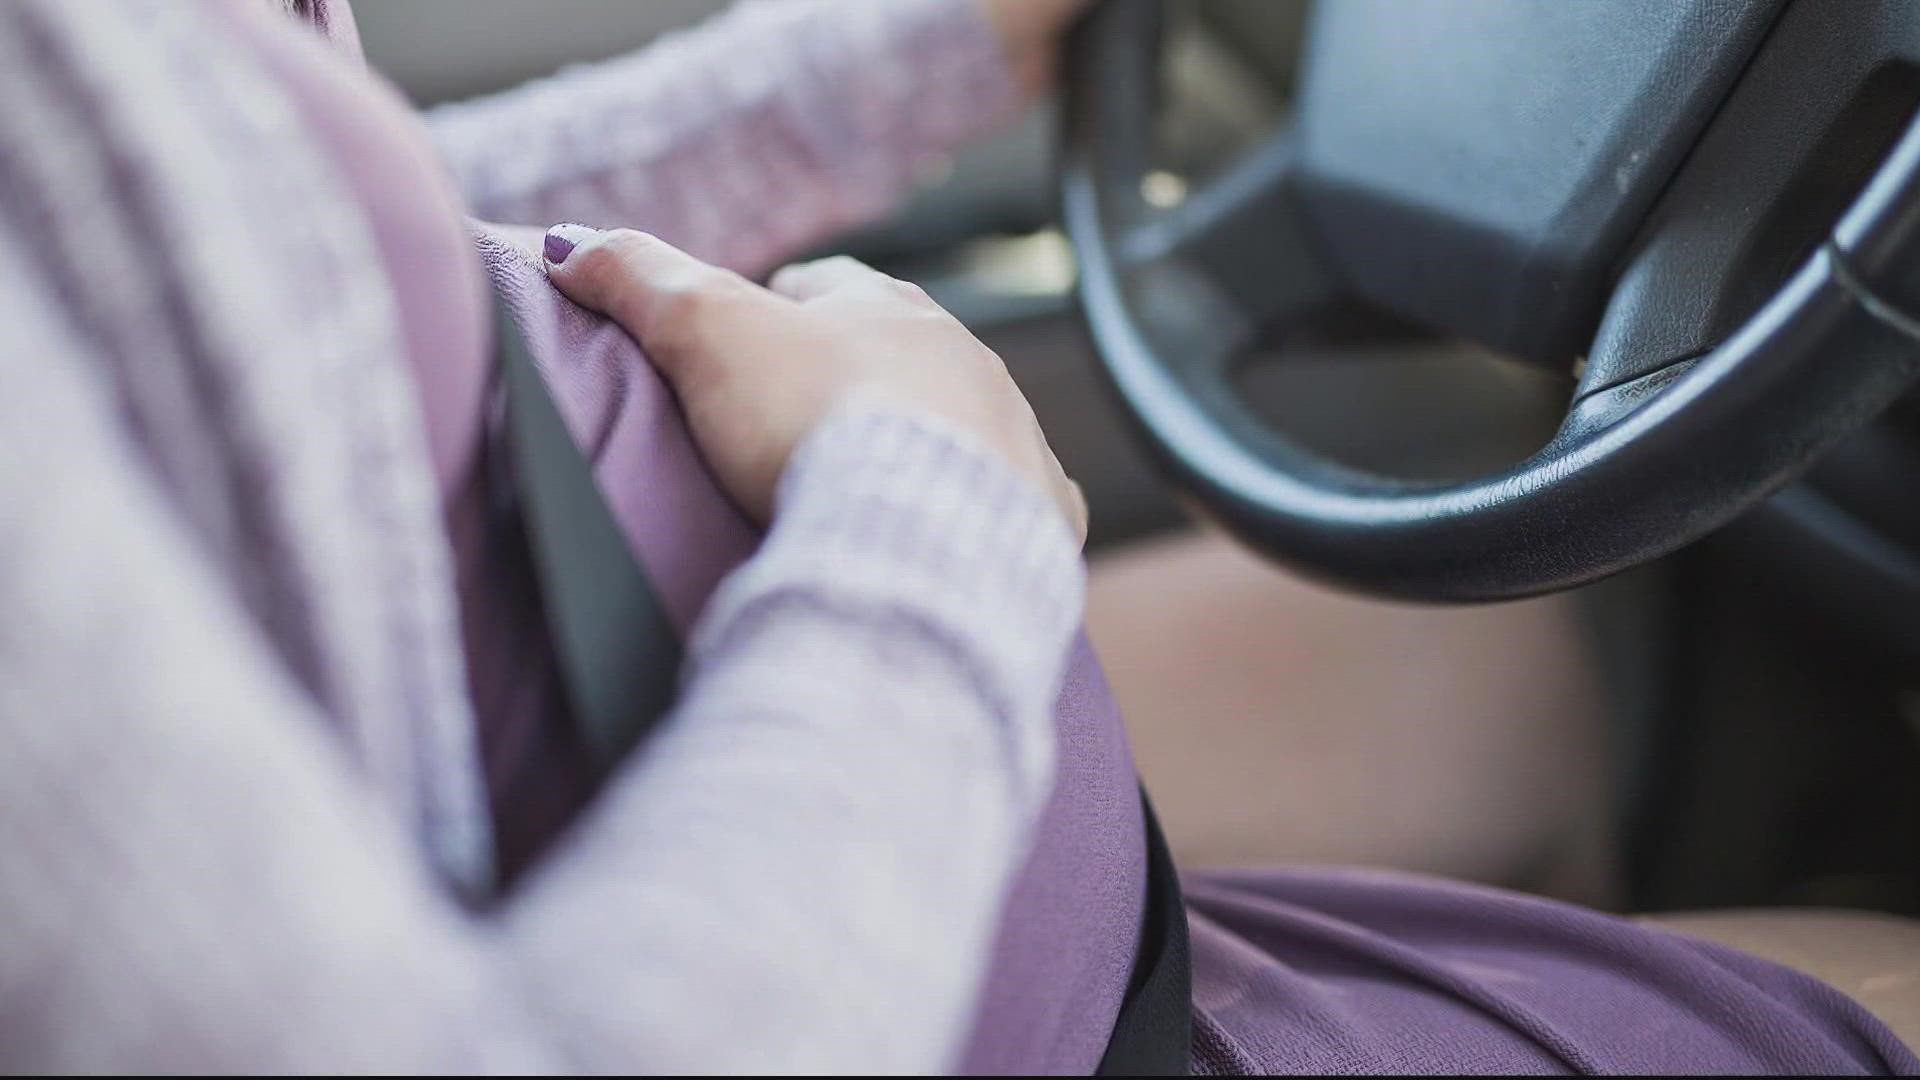 Pregnant woman's fetus counts as a person in carpool lanes, proposed  Virginia bill says | wusa9.com